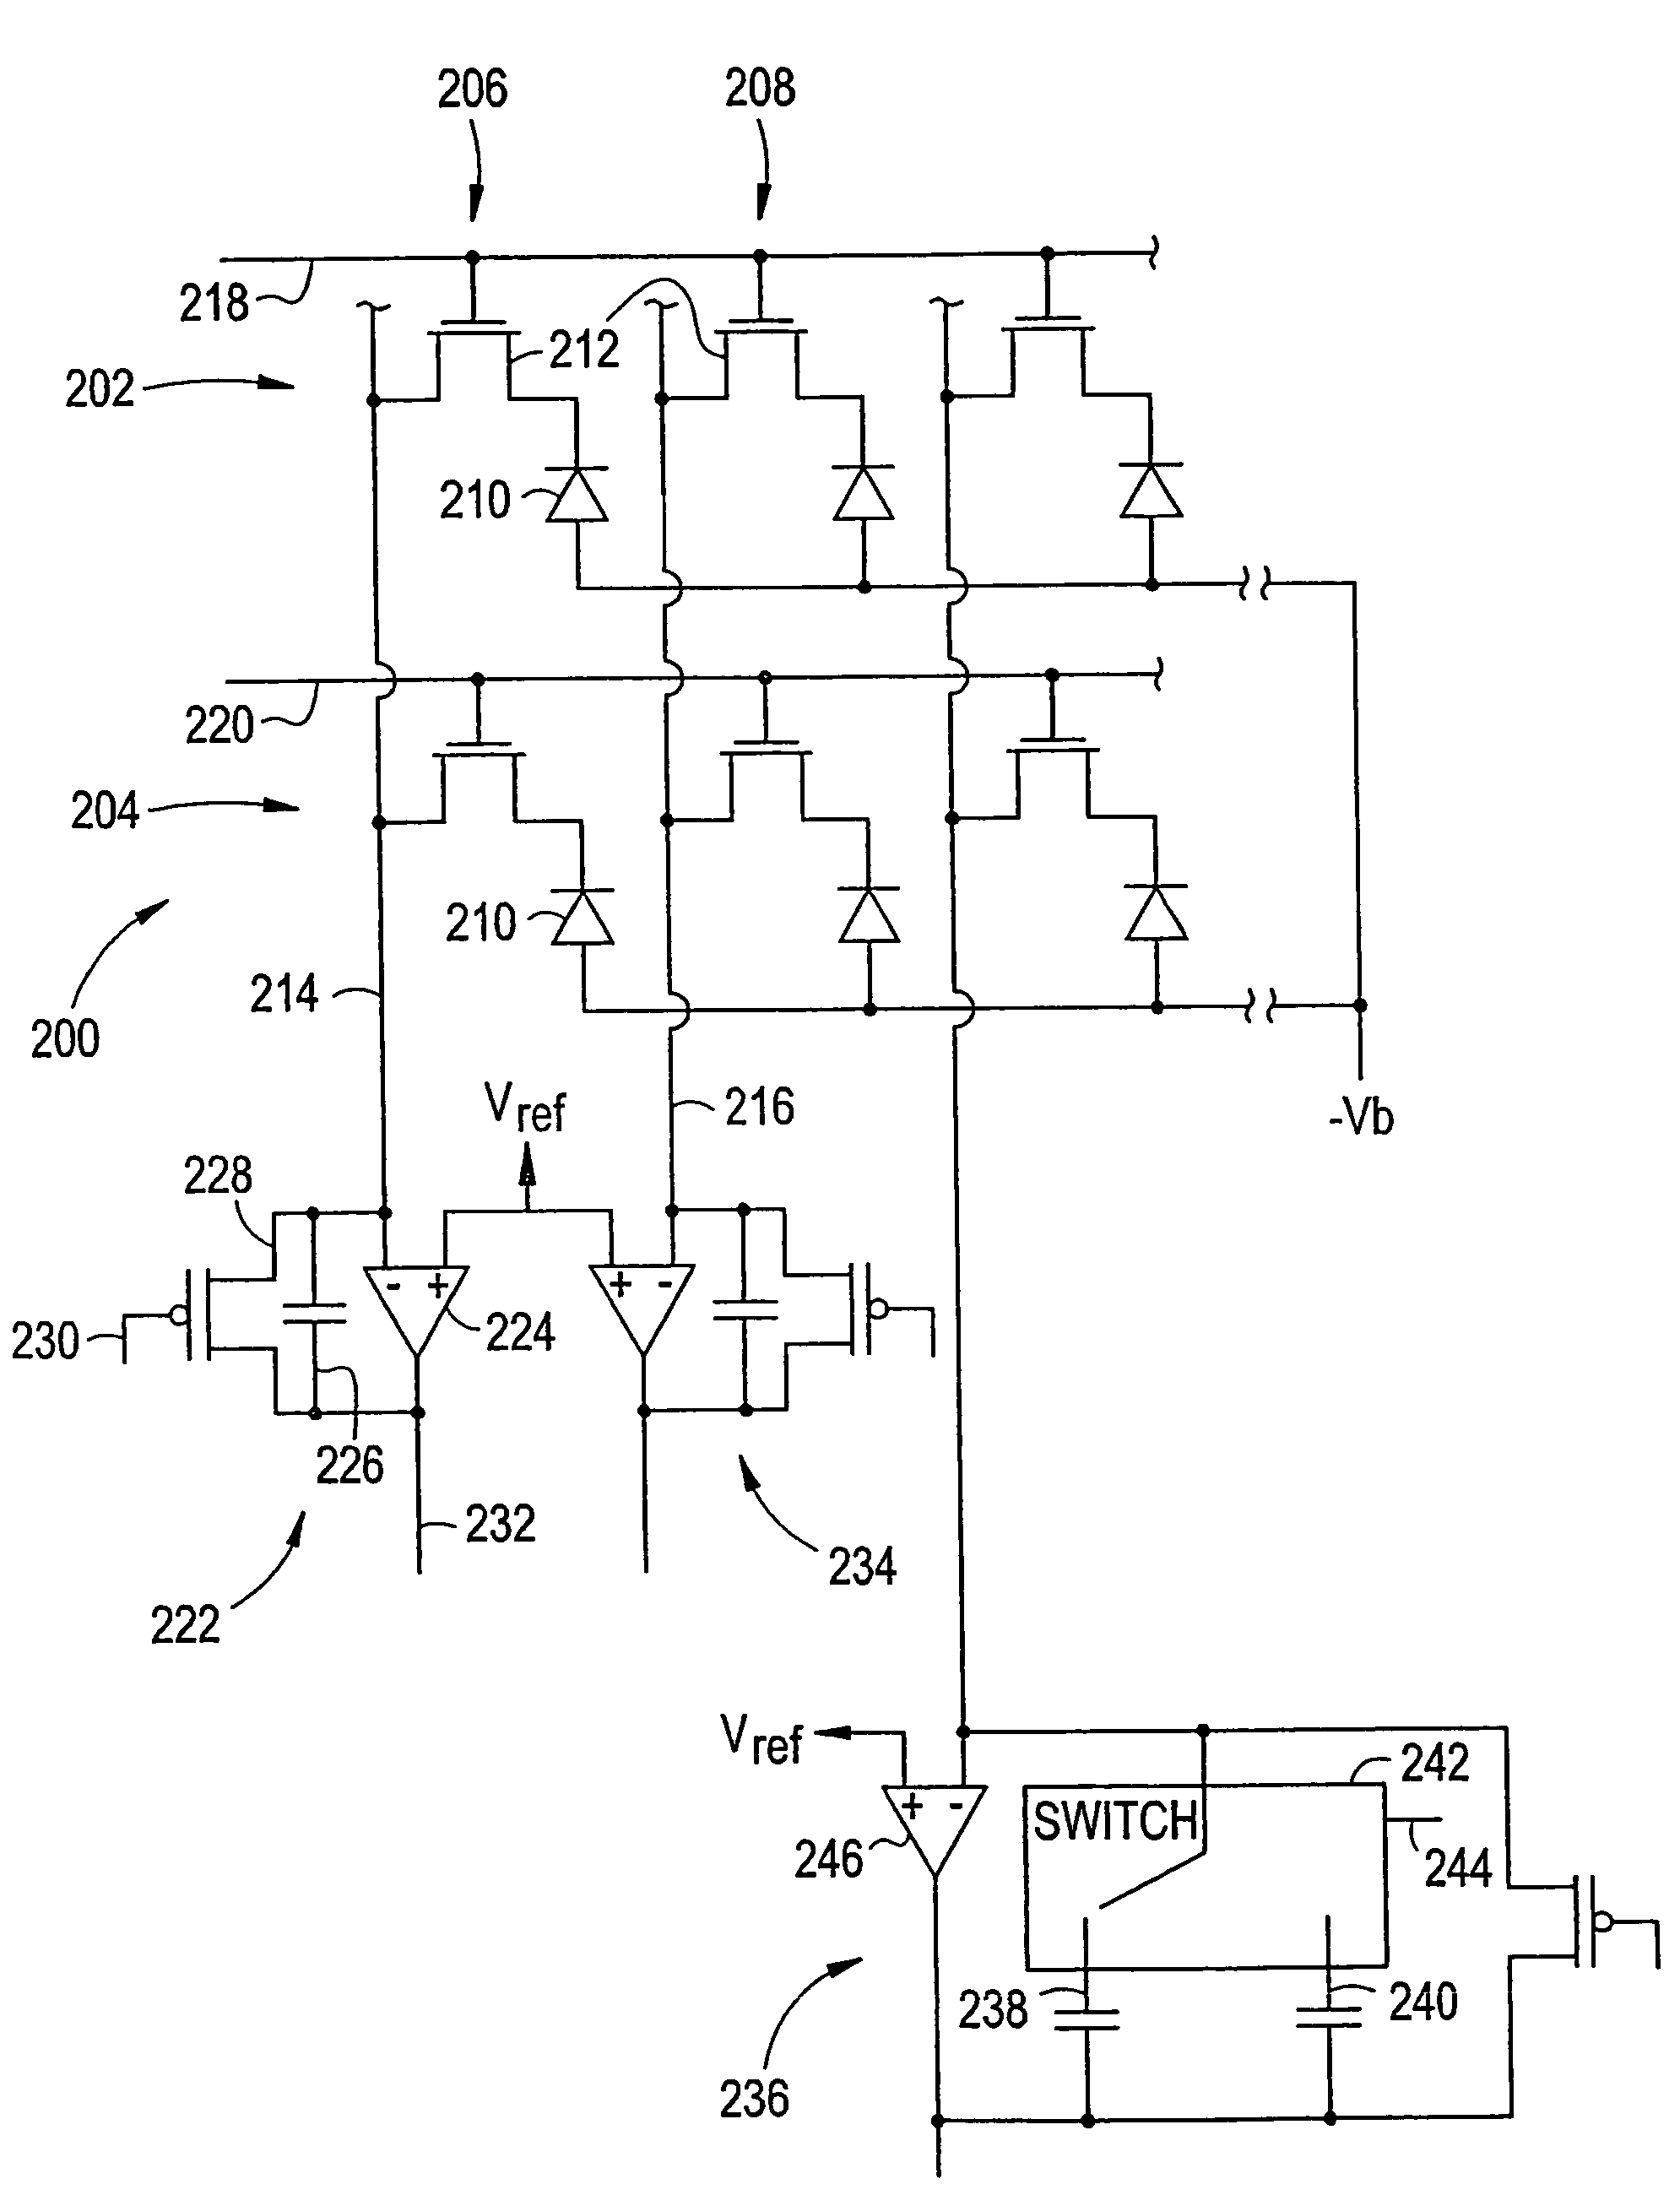 Method and apparatus for preventing image artifacts